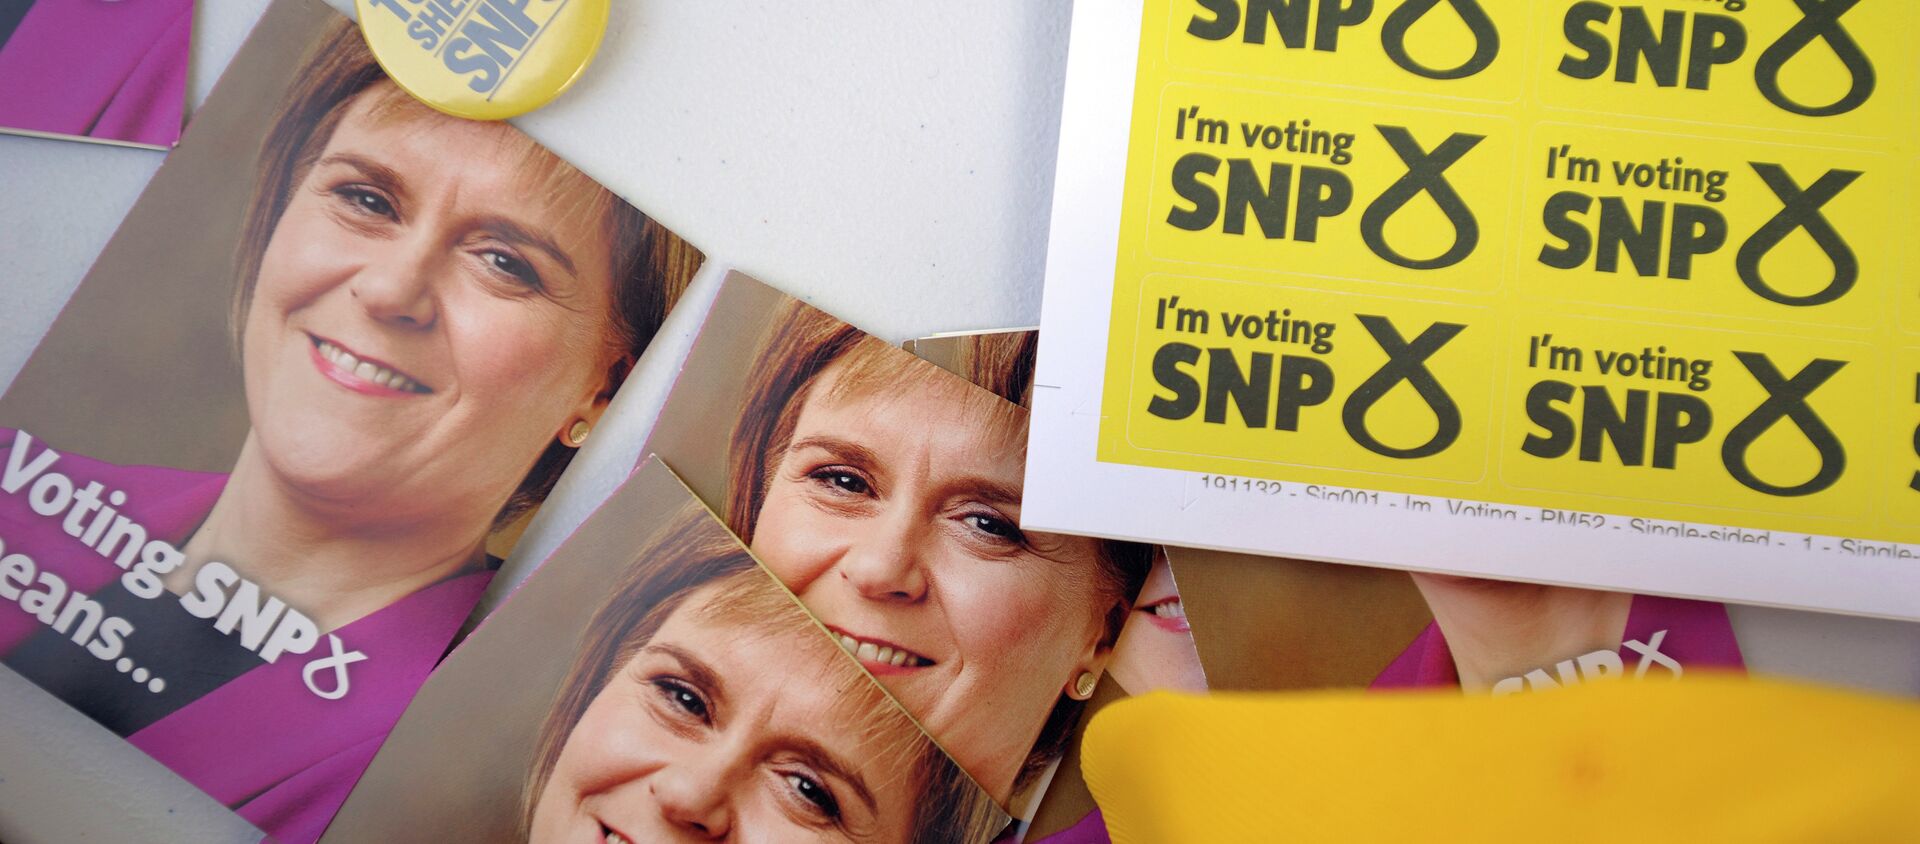 Campaign materials for the SNP featuring the face of Scottish First Minister and SNP leader Nicola Sturgeon in Edinburgh - Sputnik International, 1920, 03.04.2021